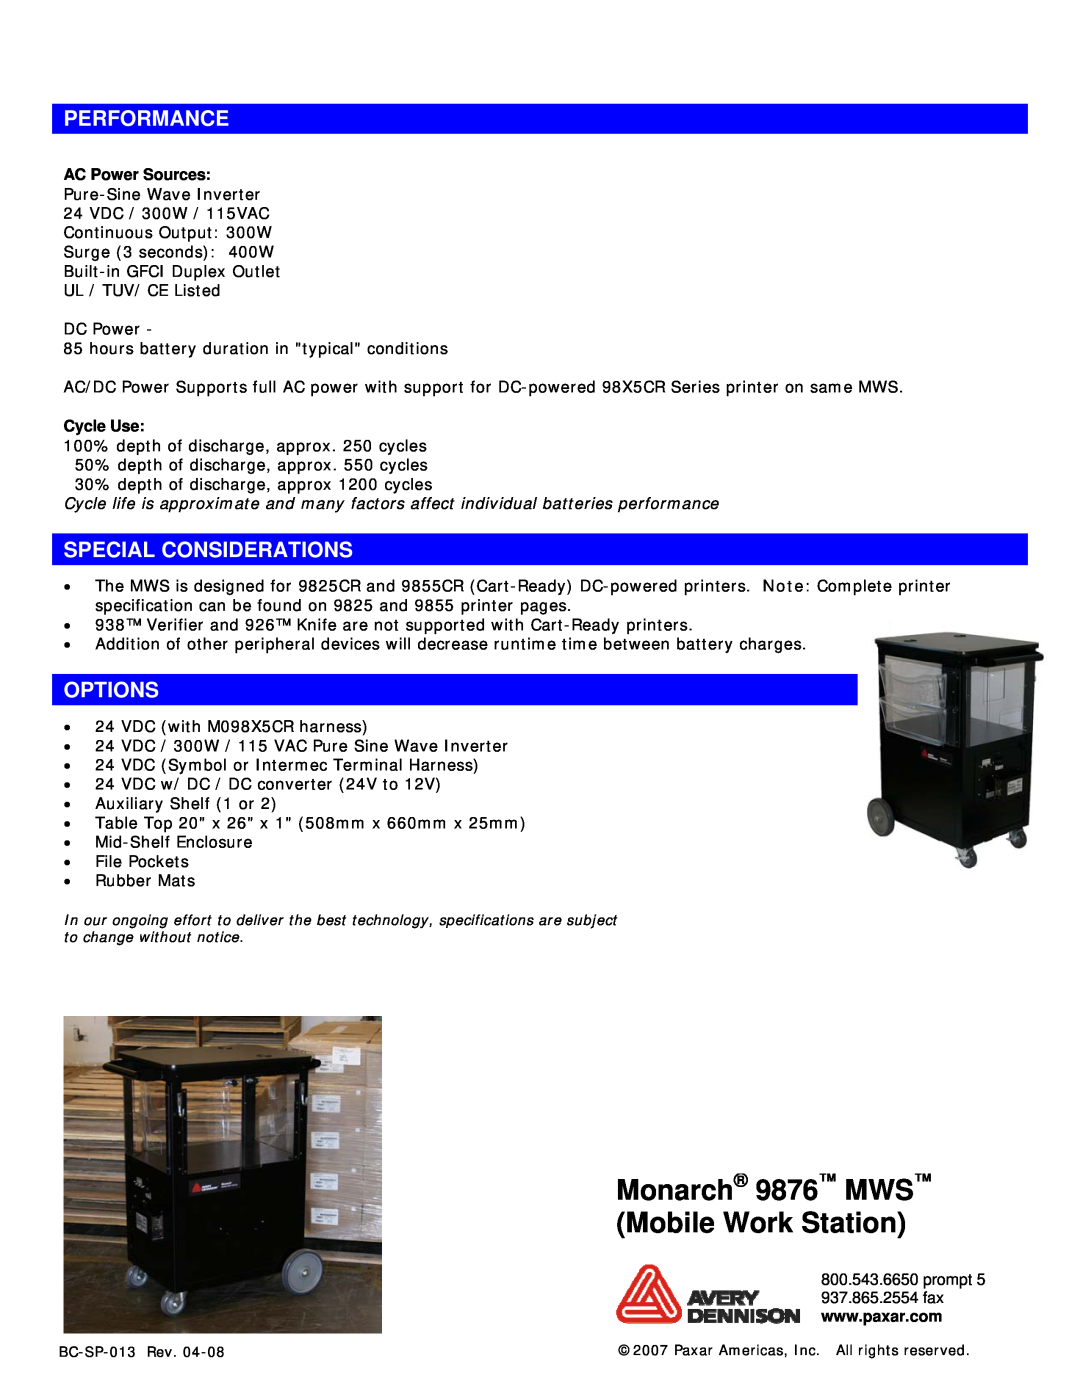 Monarch specifications Monarch 9876 MWS Mobile Work Station, Performance, Special Considerations, Options 